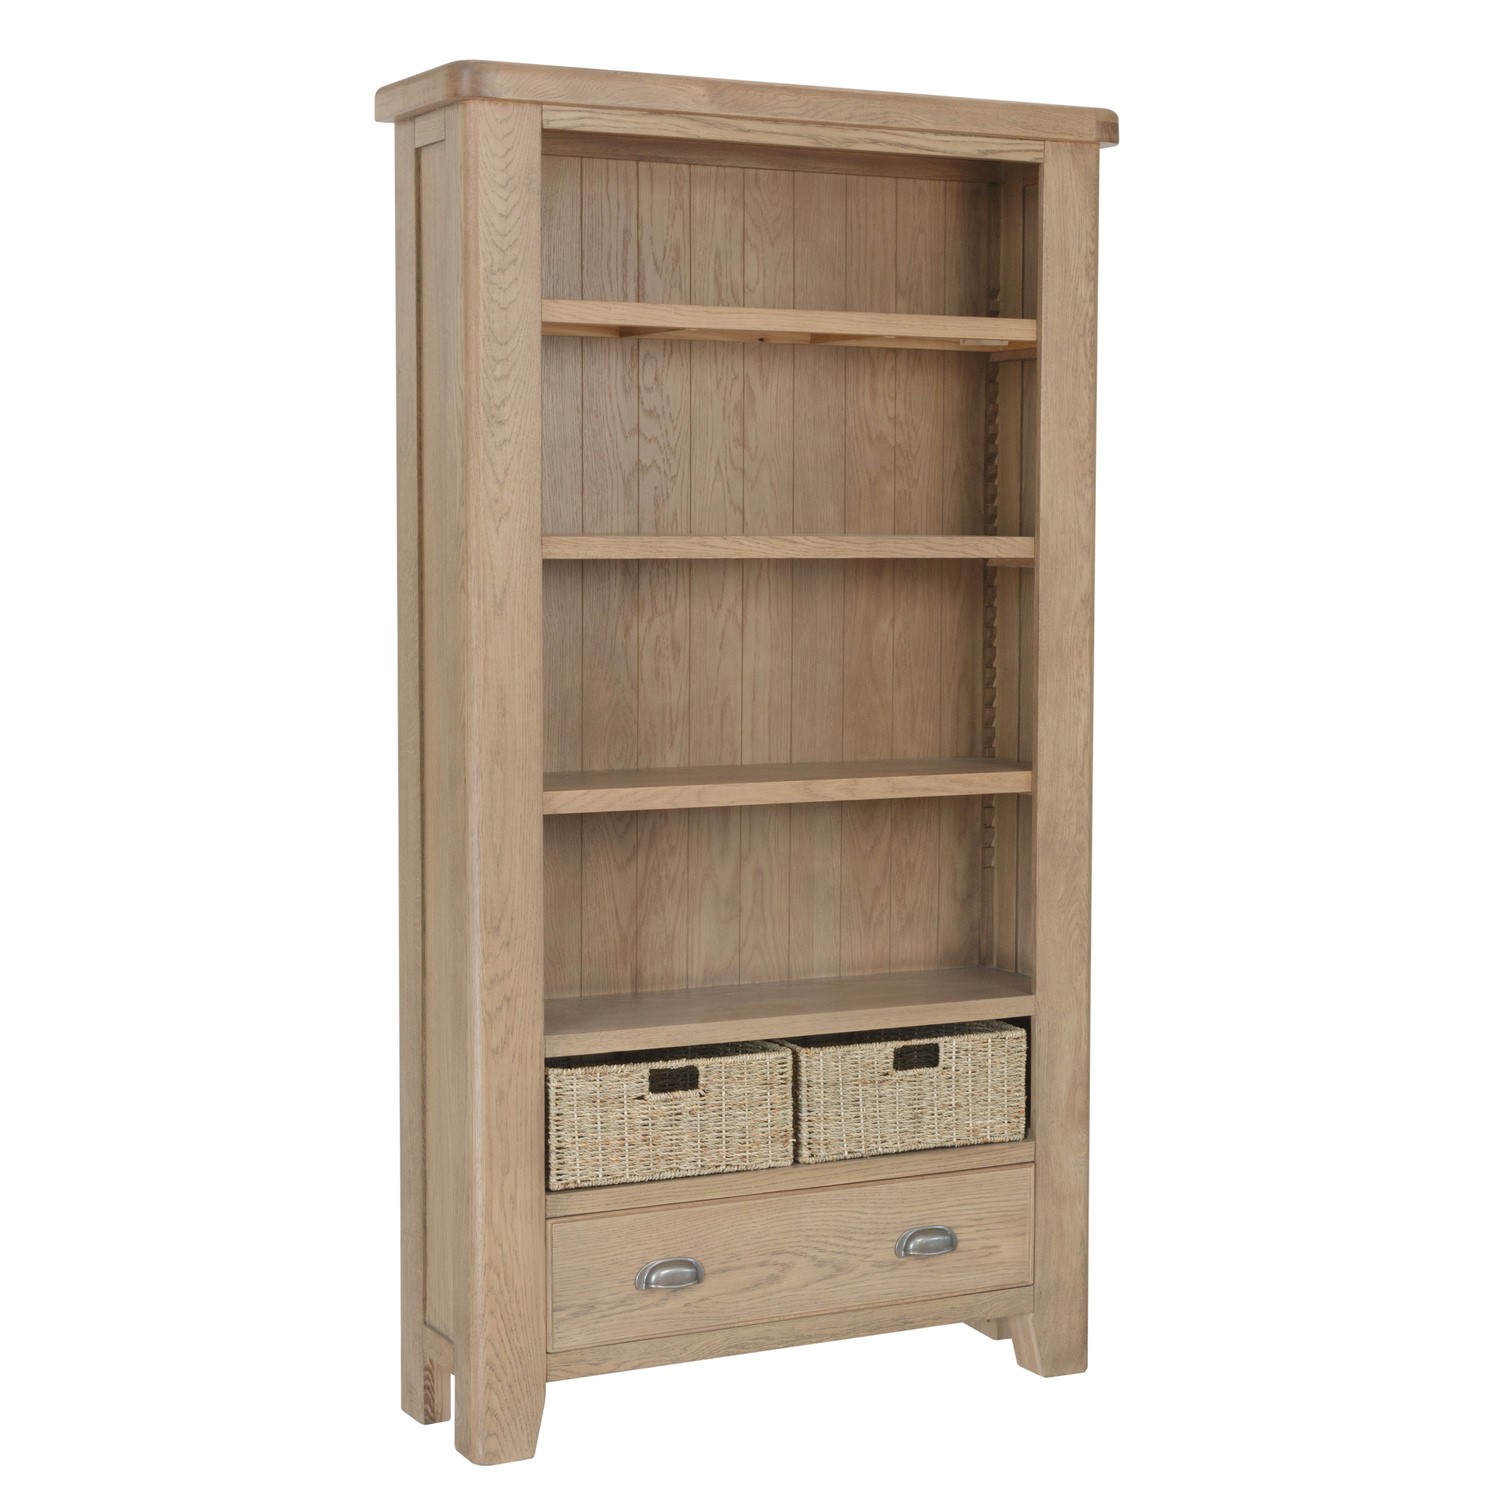 Read more about Large solid oak bookcase with drawers pegasus